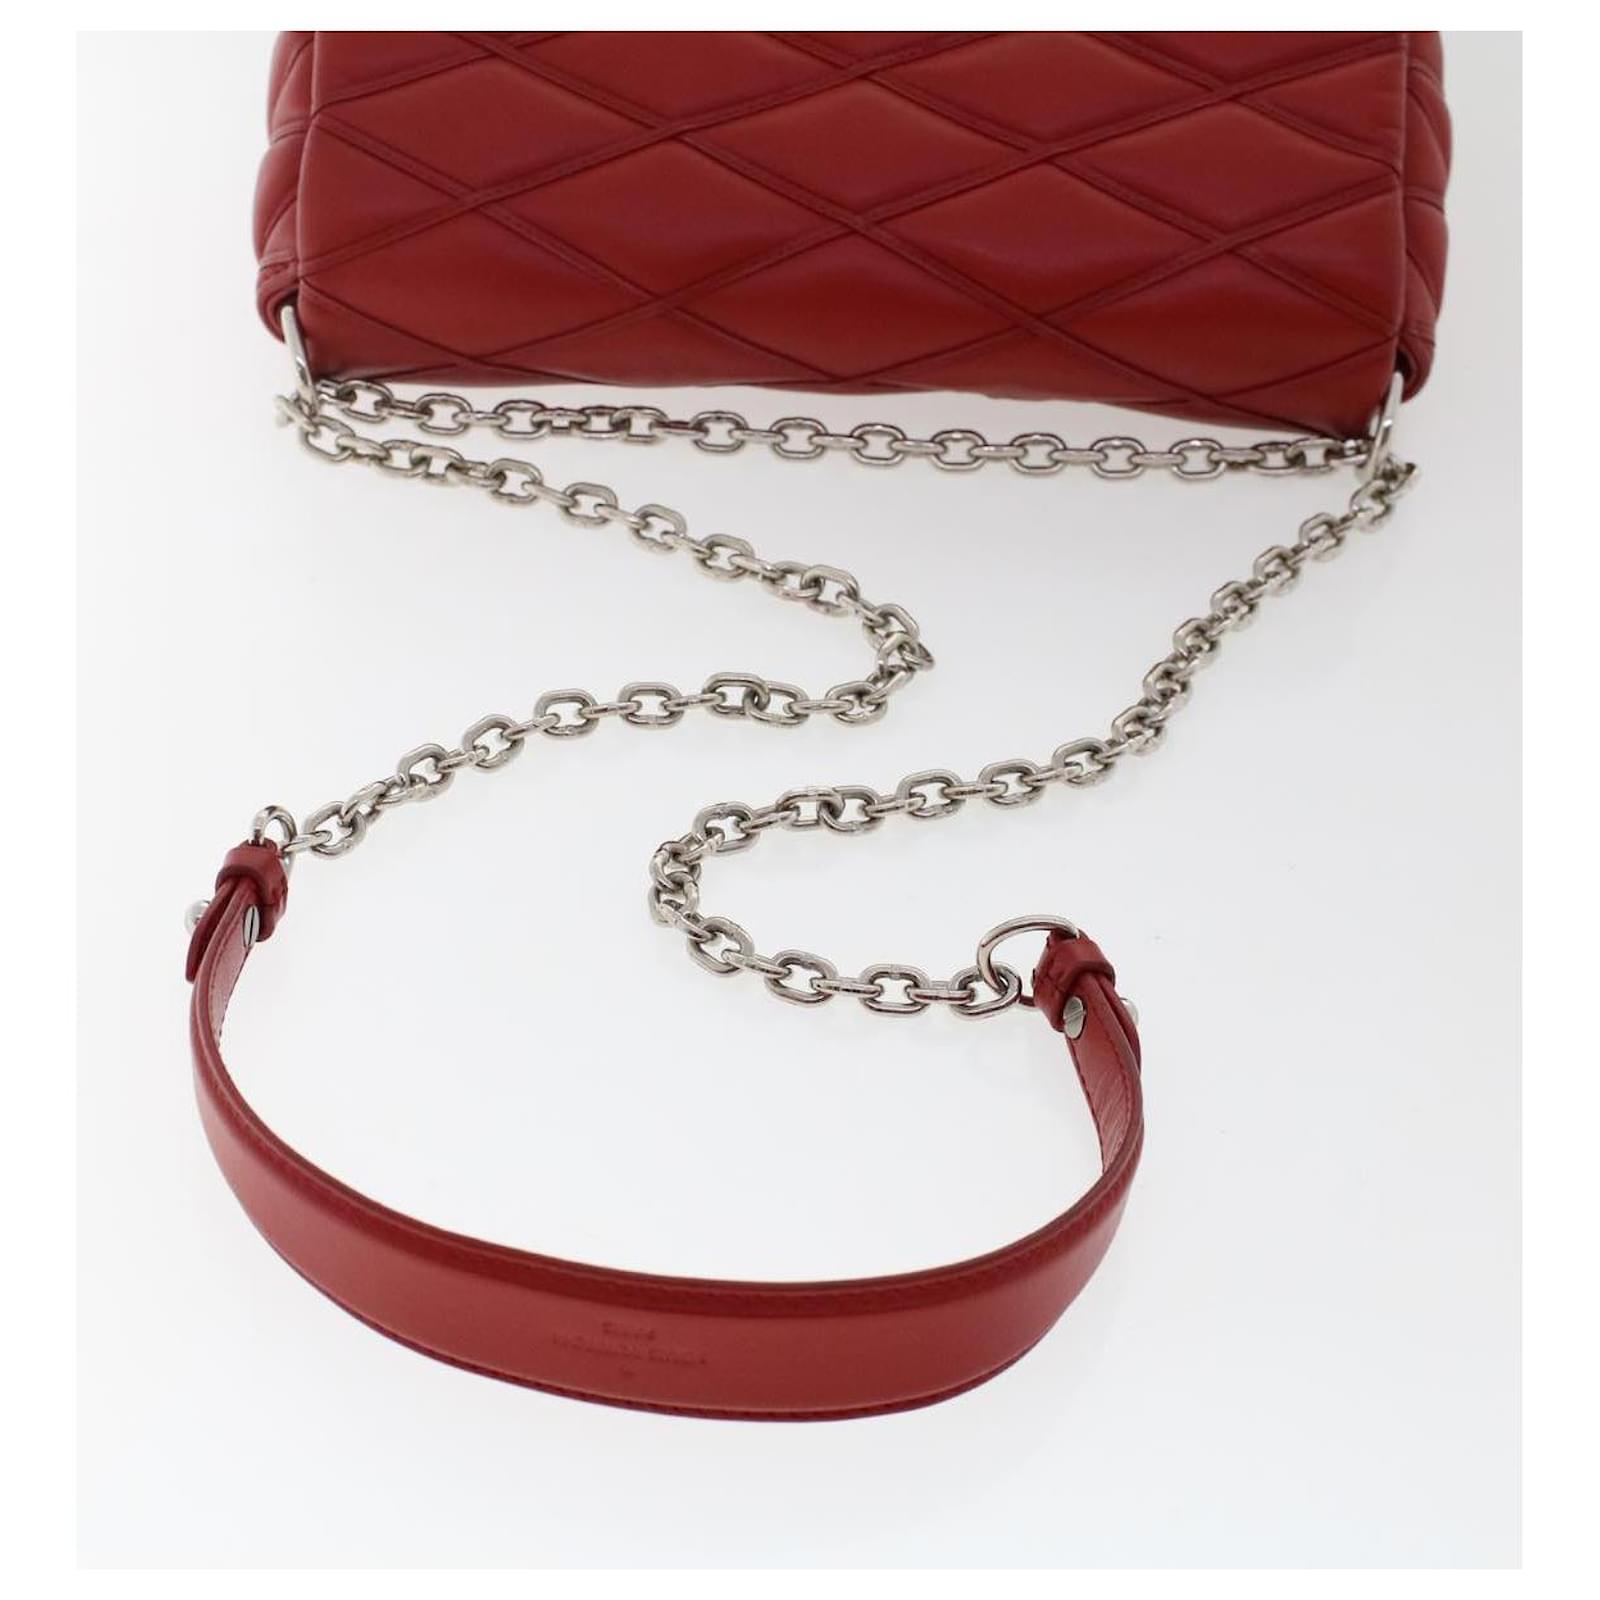 LOUIS VUITTON Quilted Chain Martage Shoulder Bag Leather Red